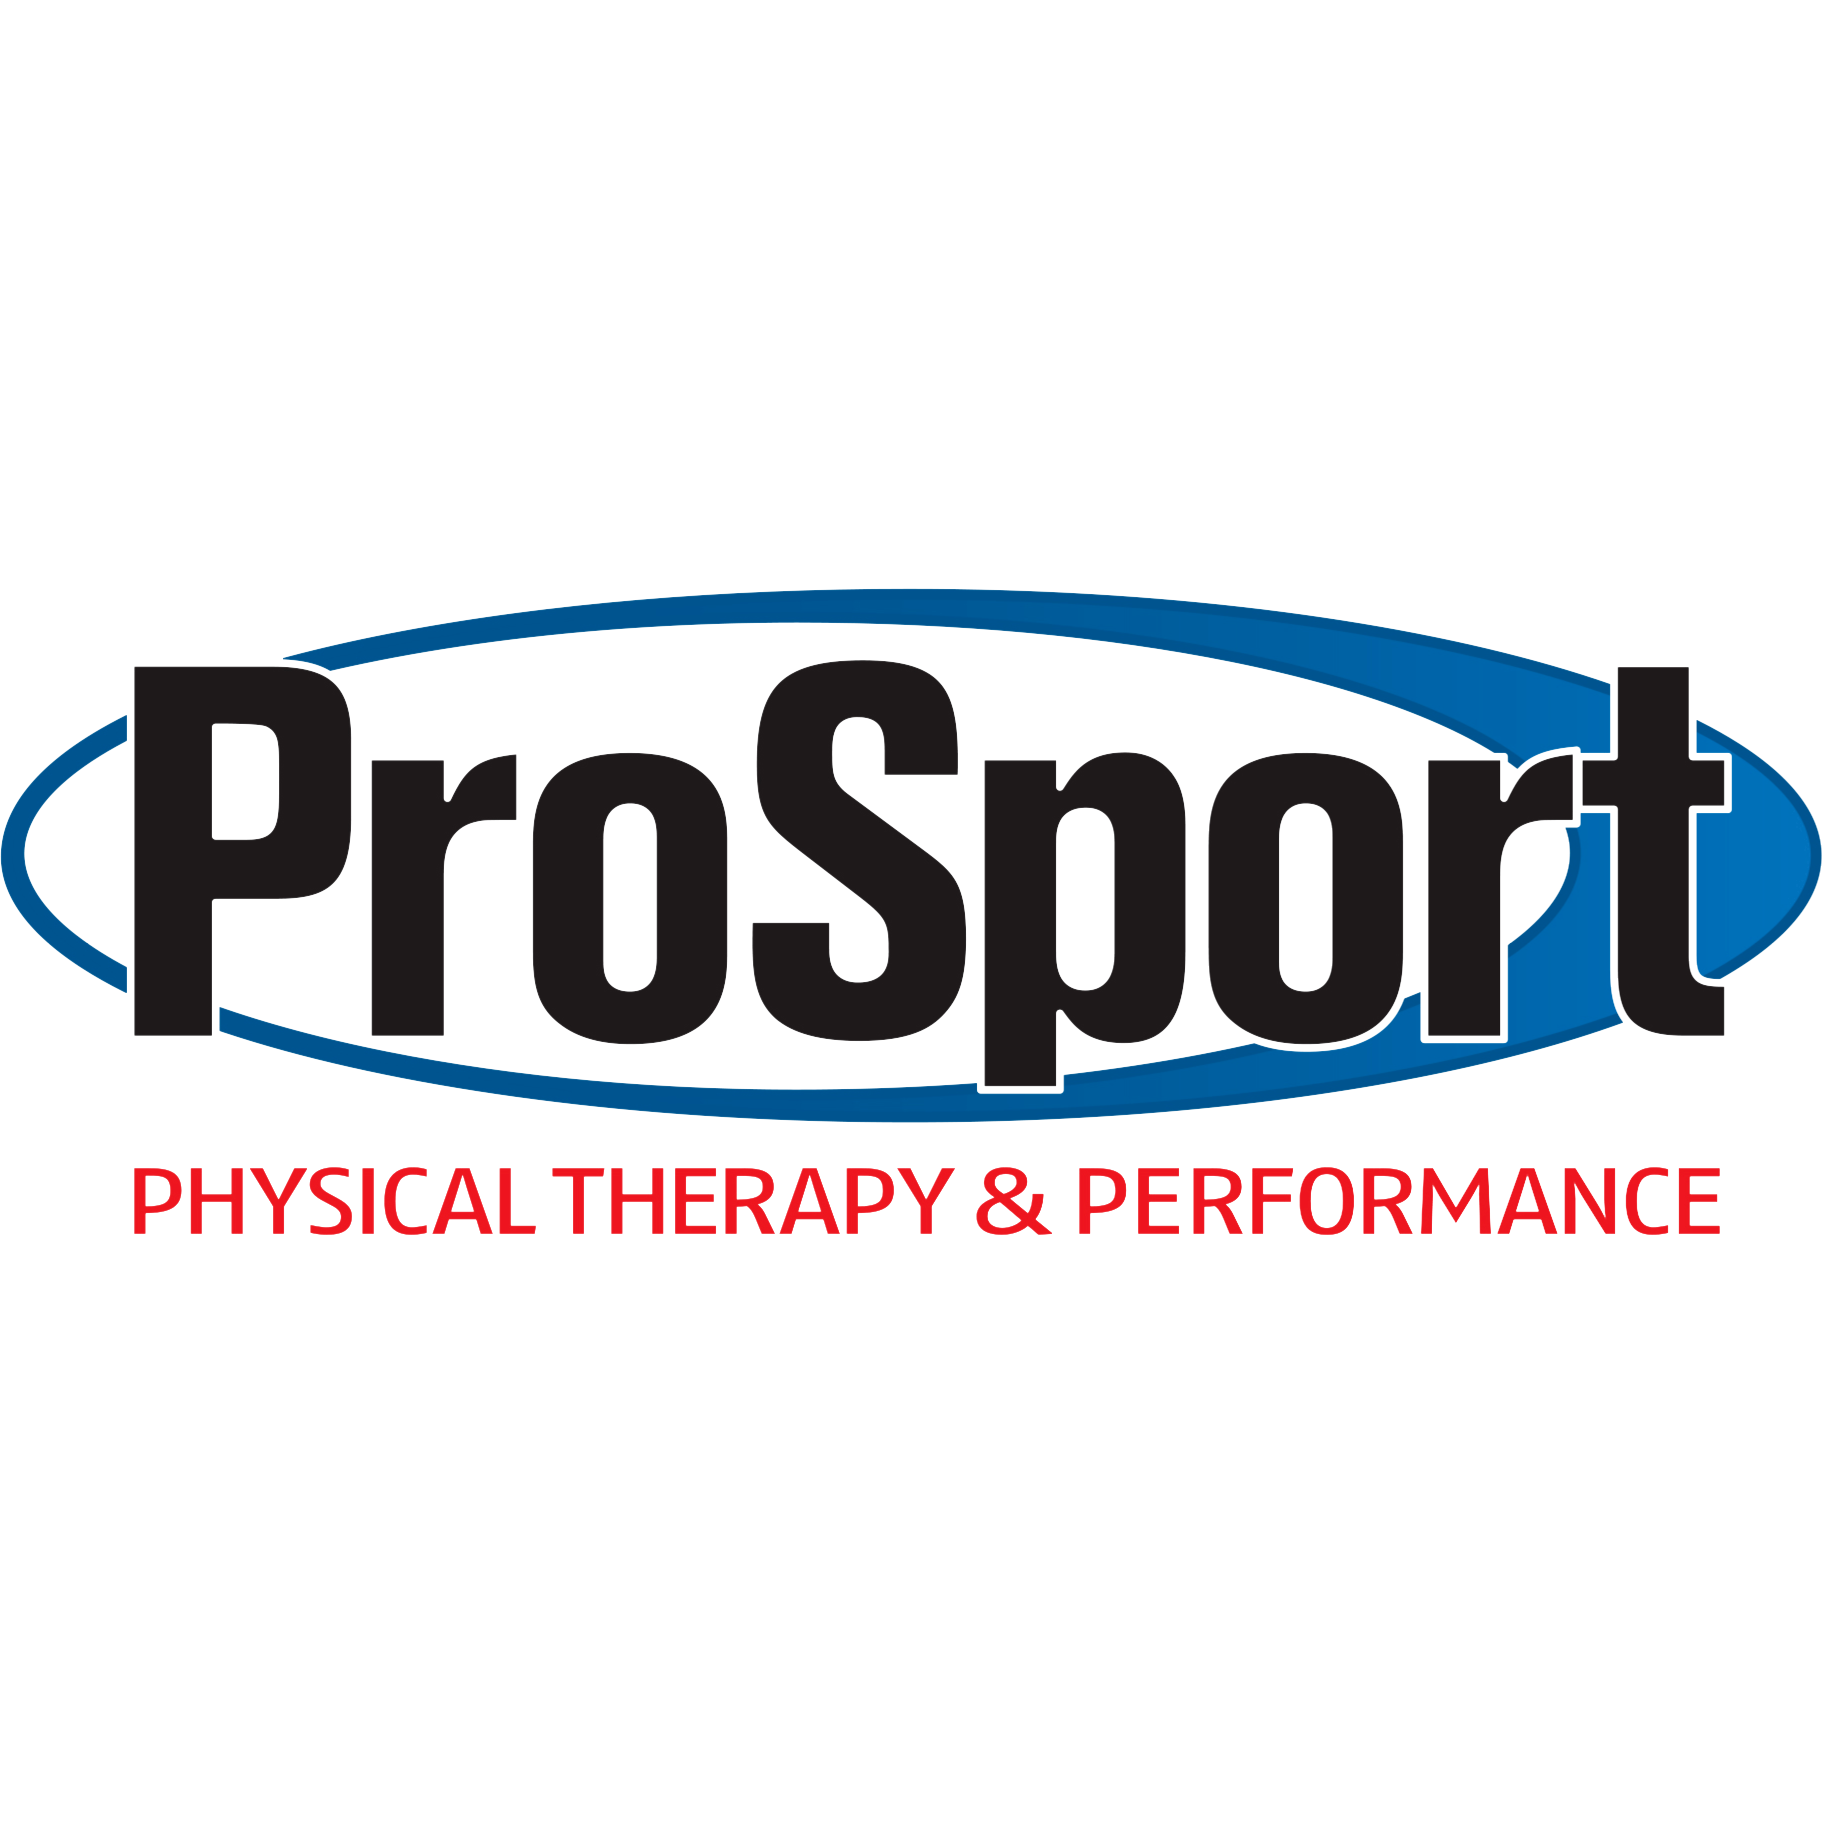 ProSport Physical Therapy & Performance